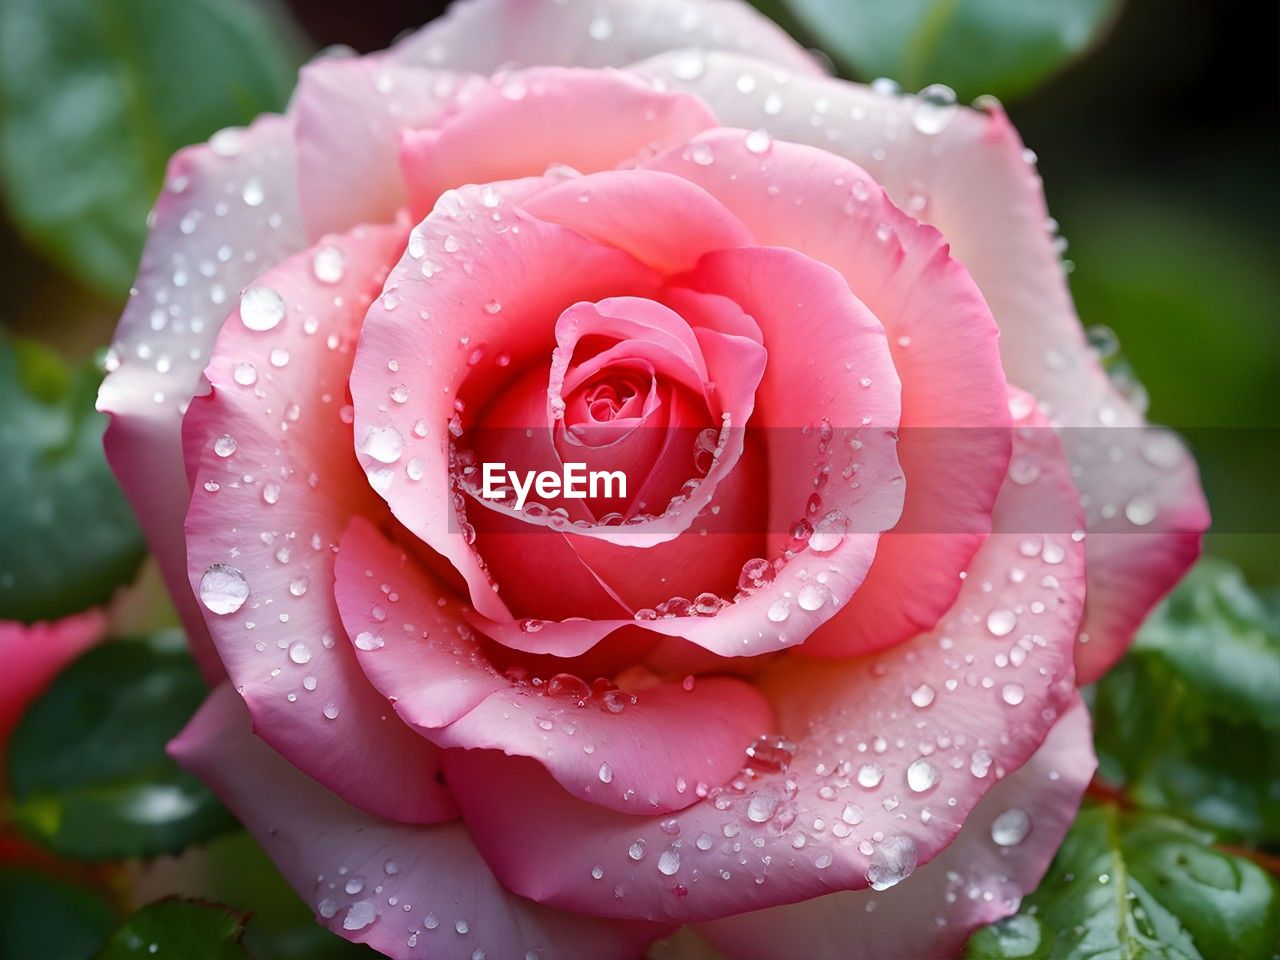 drop, pink, flower, plant, flowering plant, beauty in nature, wet, water, rose, freshness, petal, nature, close-up, dew, rain, flower head, inflorescence, garden roses, fragility, growth, leaf, raindrop, rose - flower, plant part, macro photography, no people, outdoors, springtime, macro, focus on foreground, extreme close-up